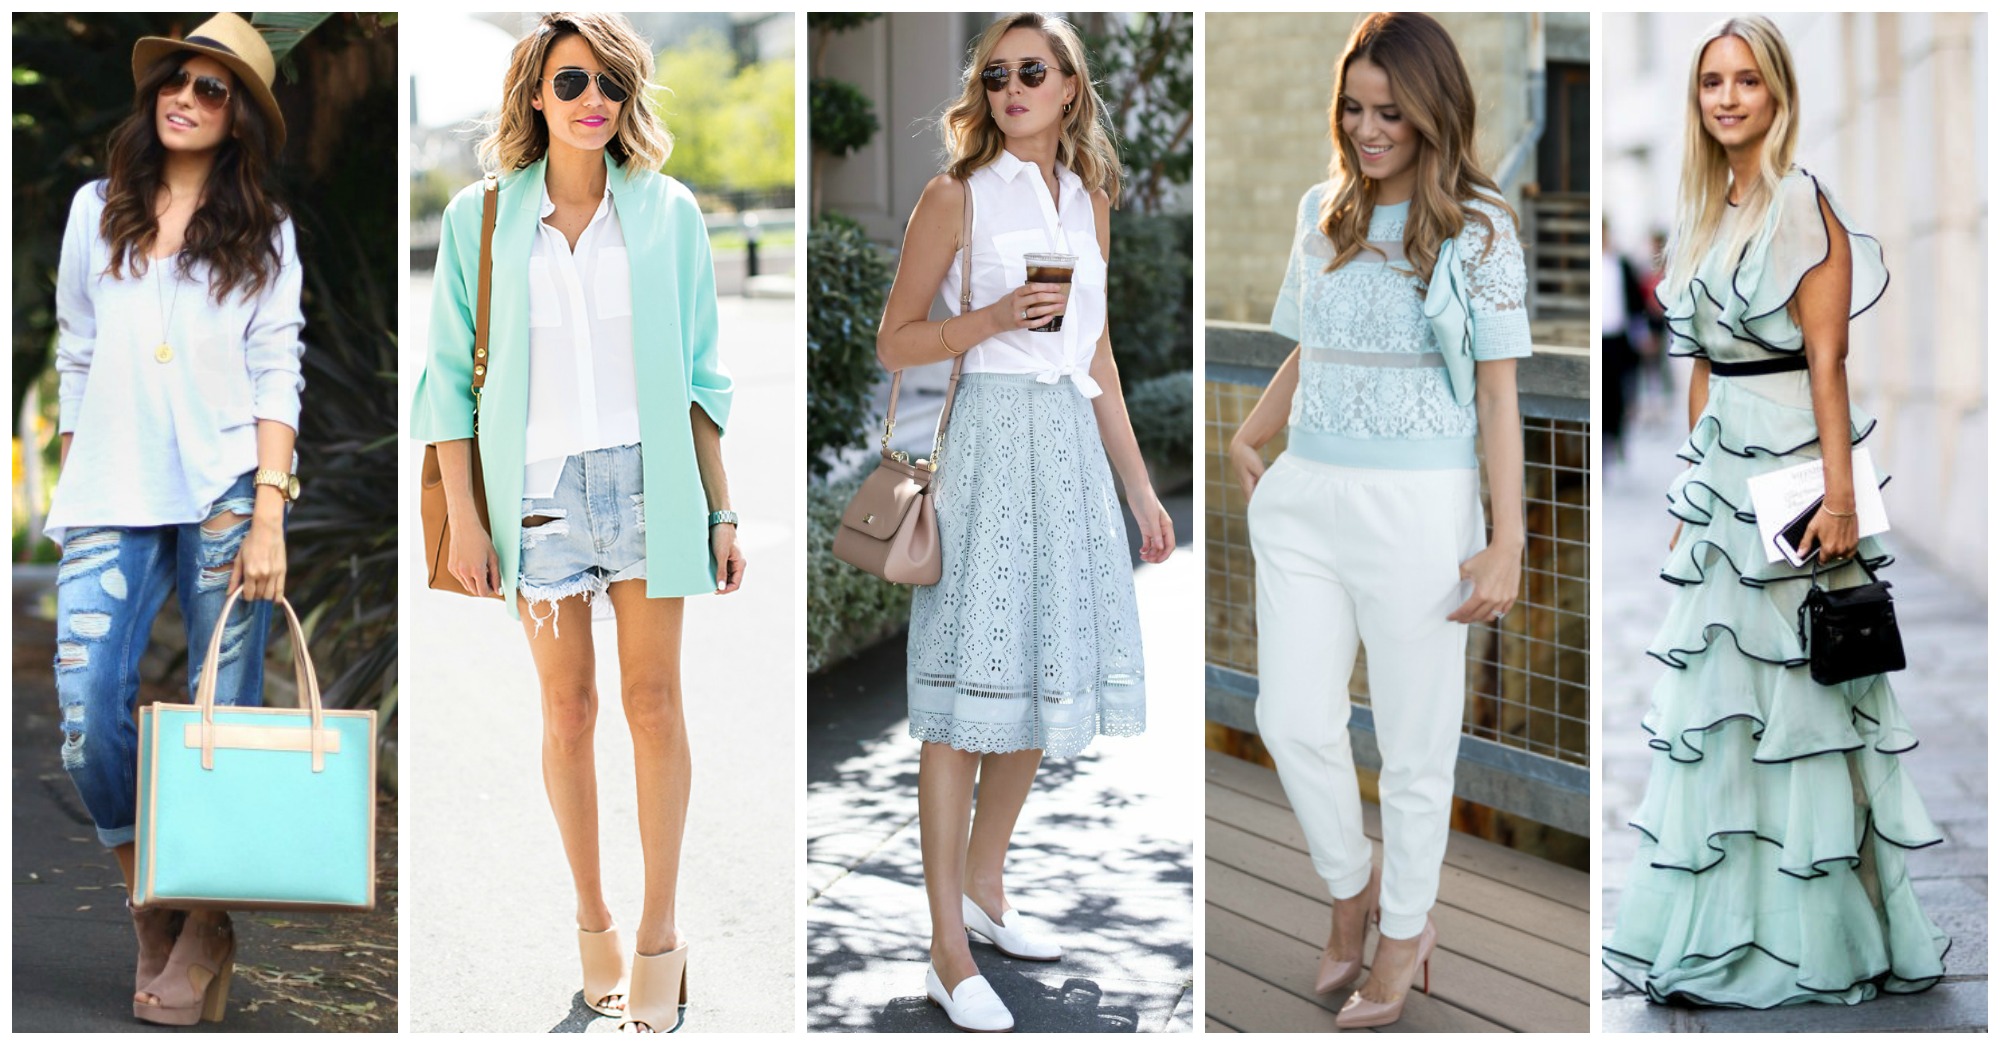 15 Chic Ways to Wear Mint Green This Summer